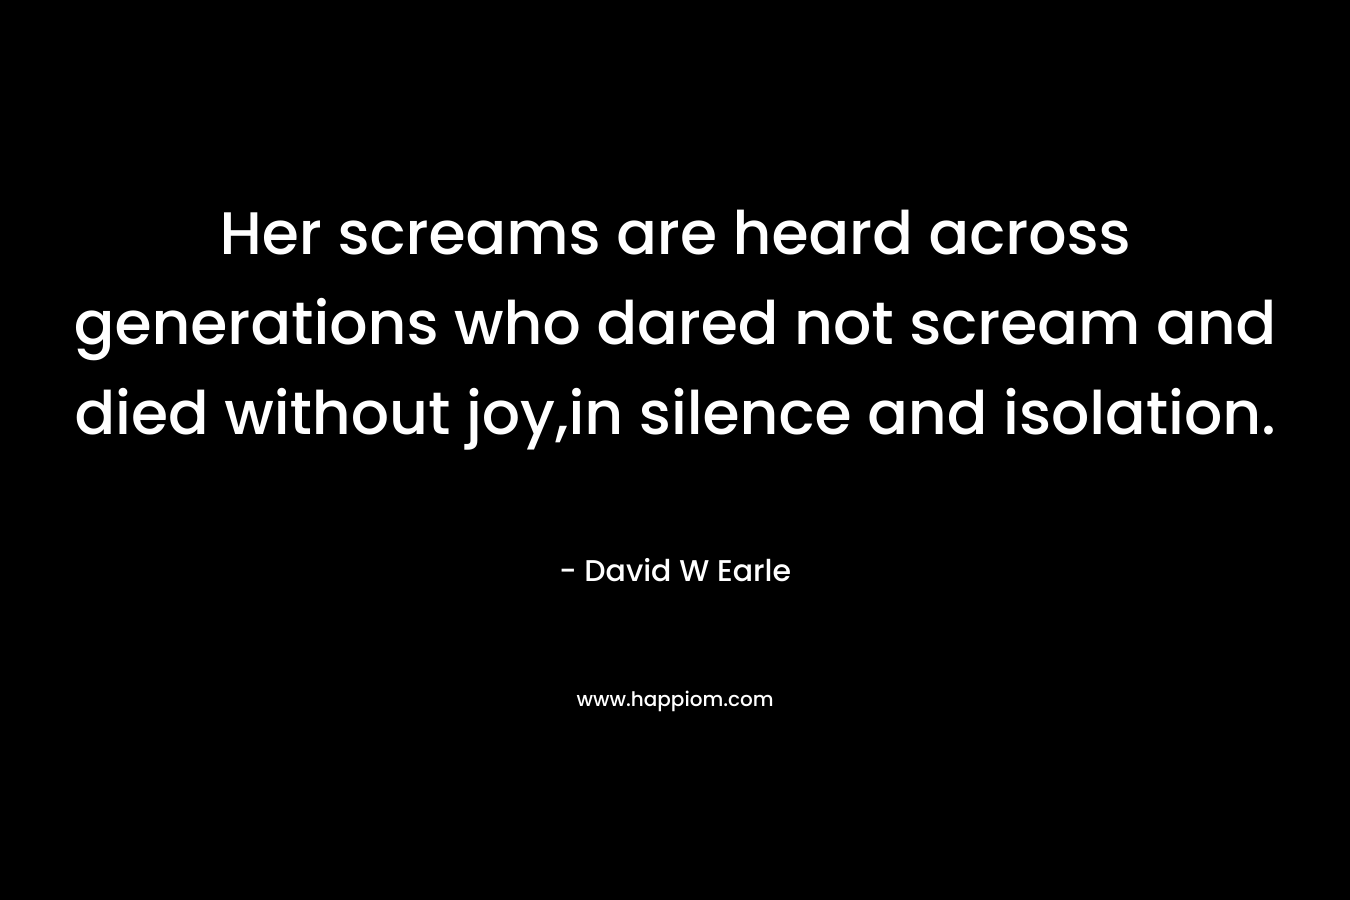 Her screams are heard across generations who dared not scream and died without joy,in silence and isolation. – David W Earle